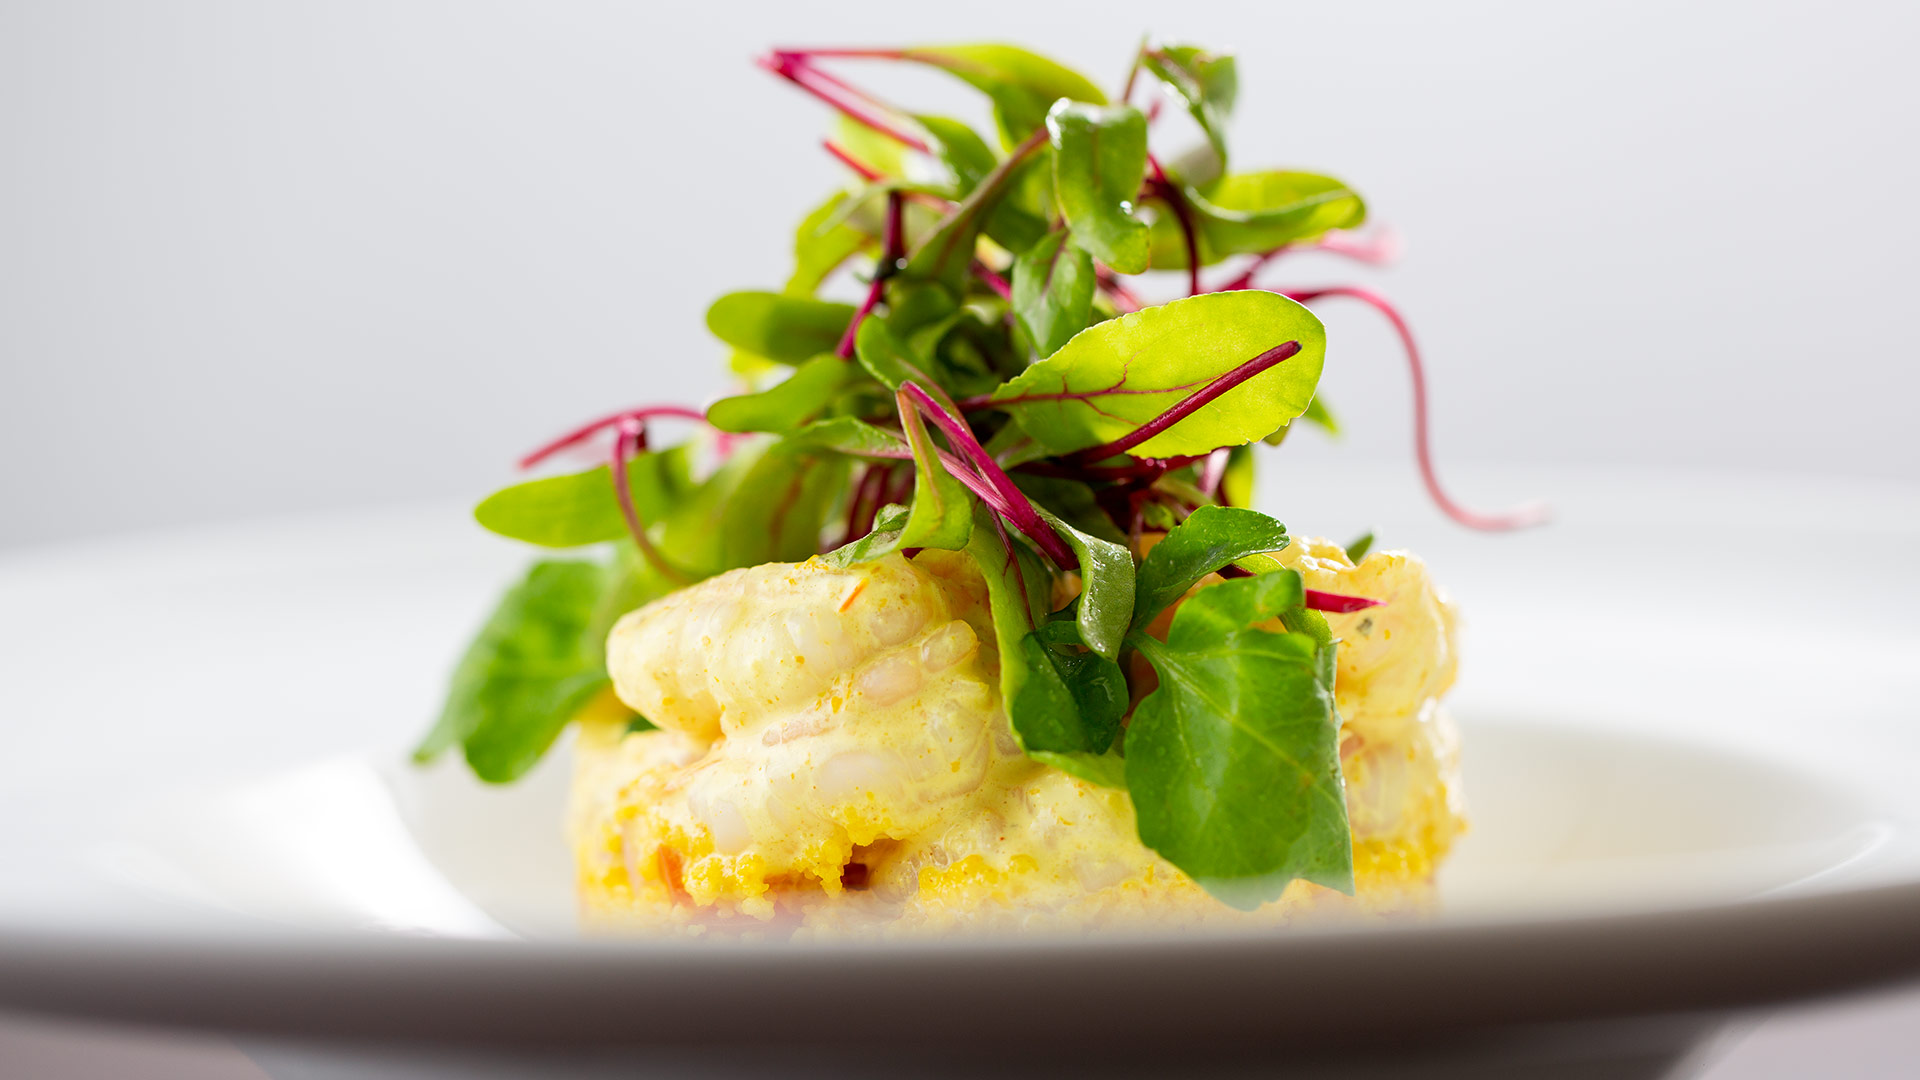 Poached Shrimp with Curry Mayo, Saffron Couscous Salad & Micro Greens